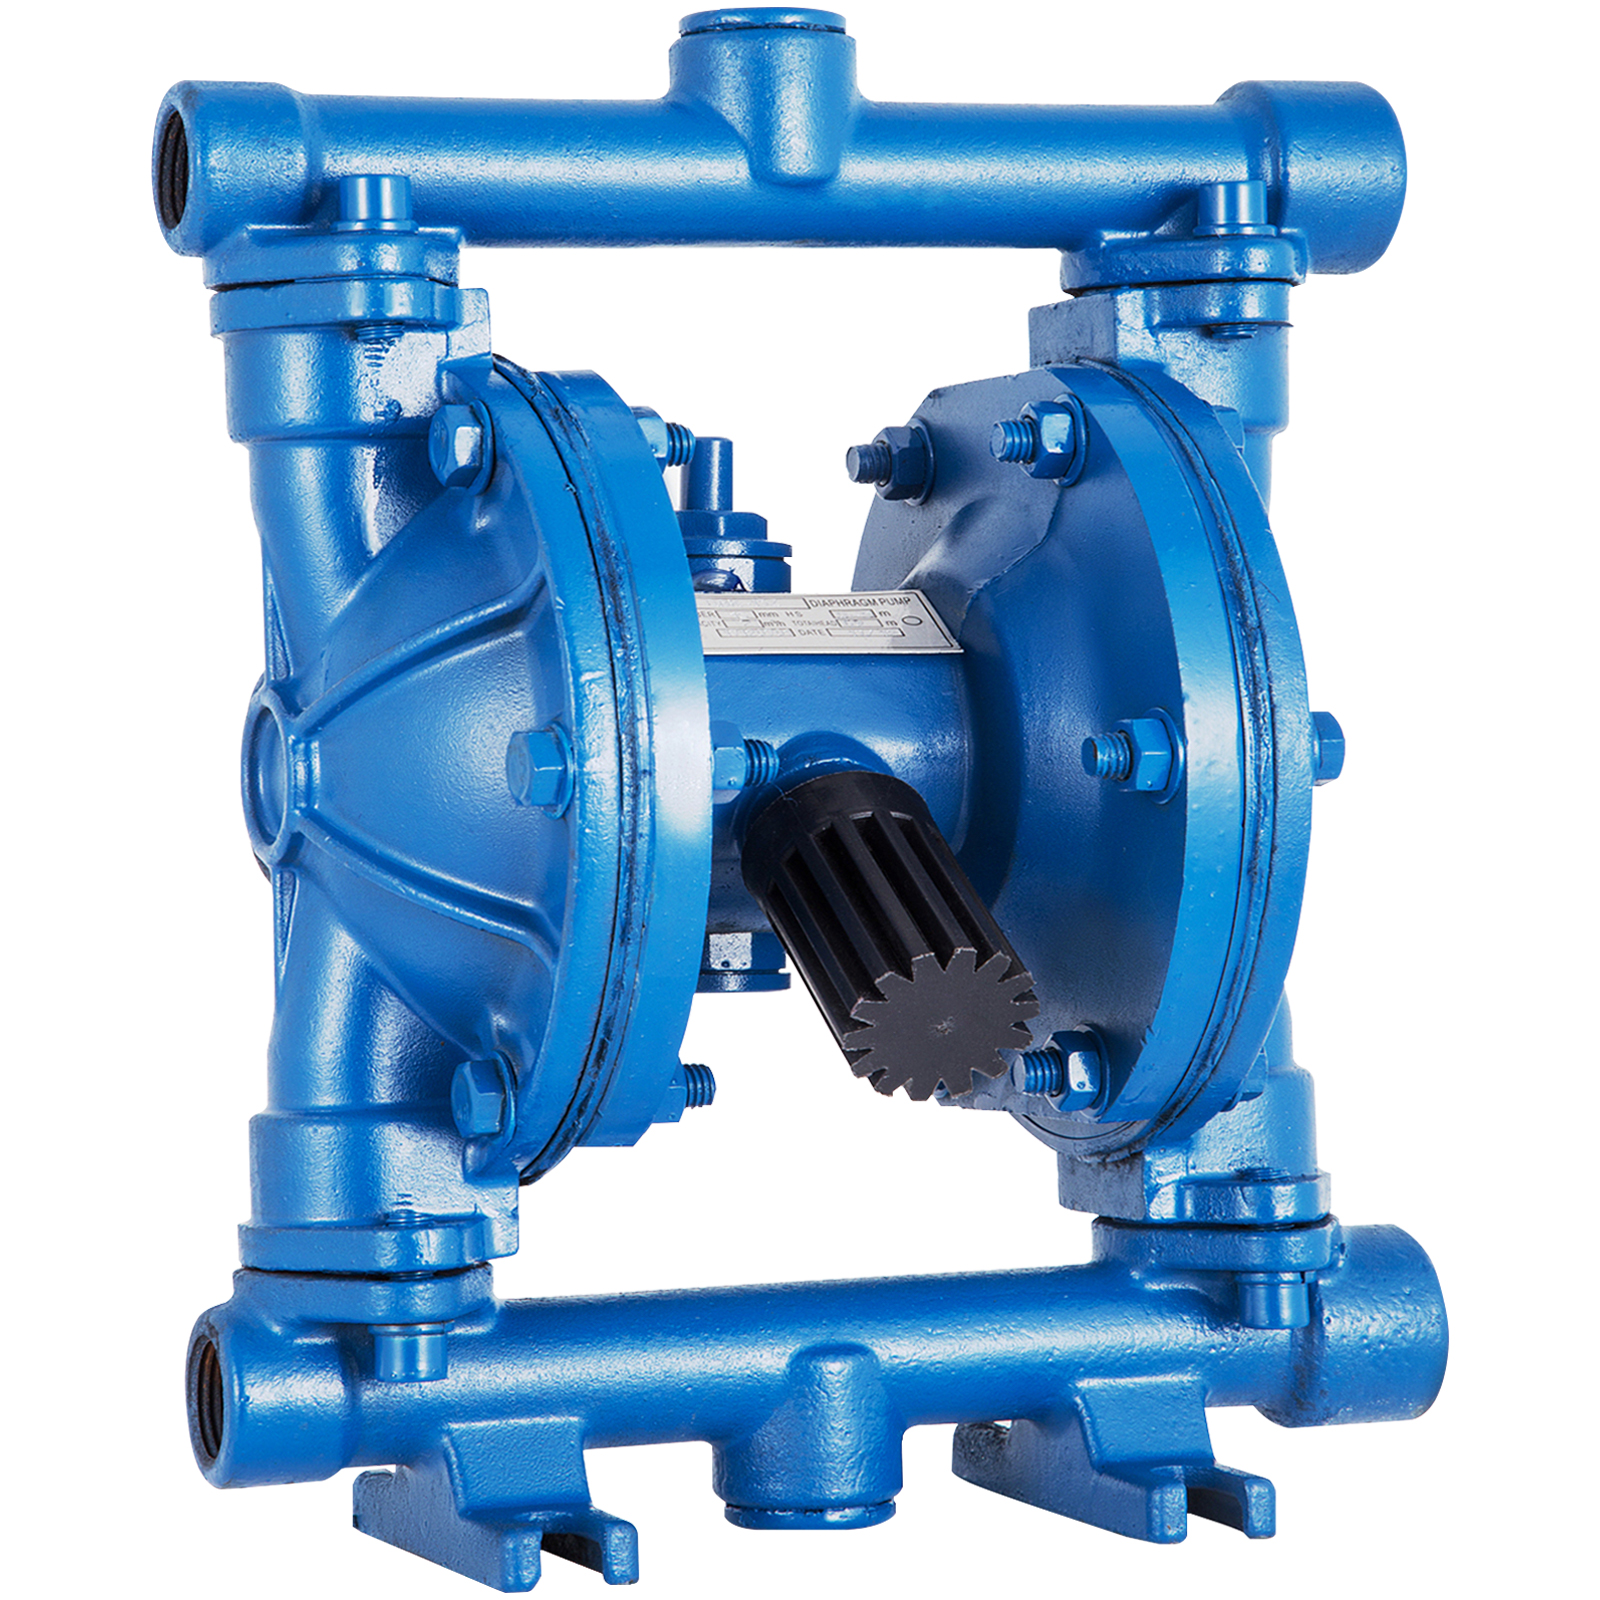 Air-Operated Double Diaphragm Pump 12GPM 115PSI 1/2" Inlet & Outlet QBK-15 Blue 